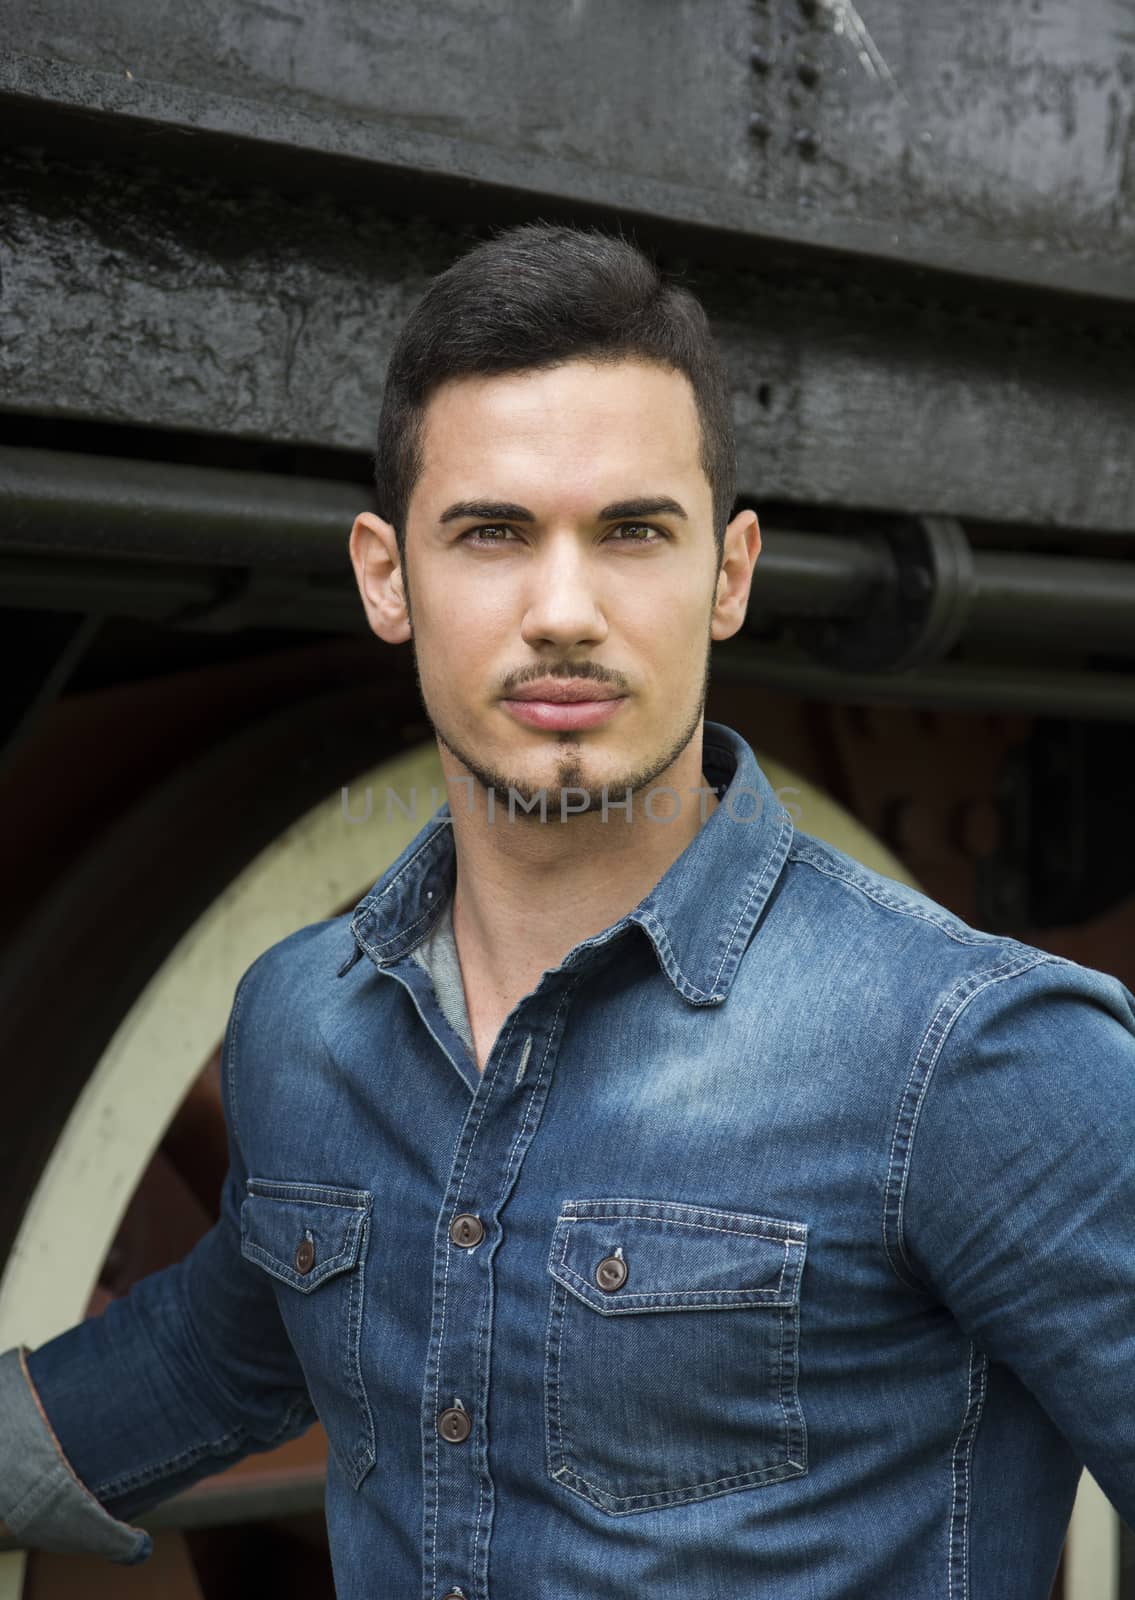 Handsome young man in denim shirt in front of old train, looking at camera